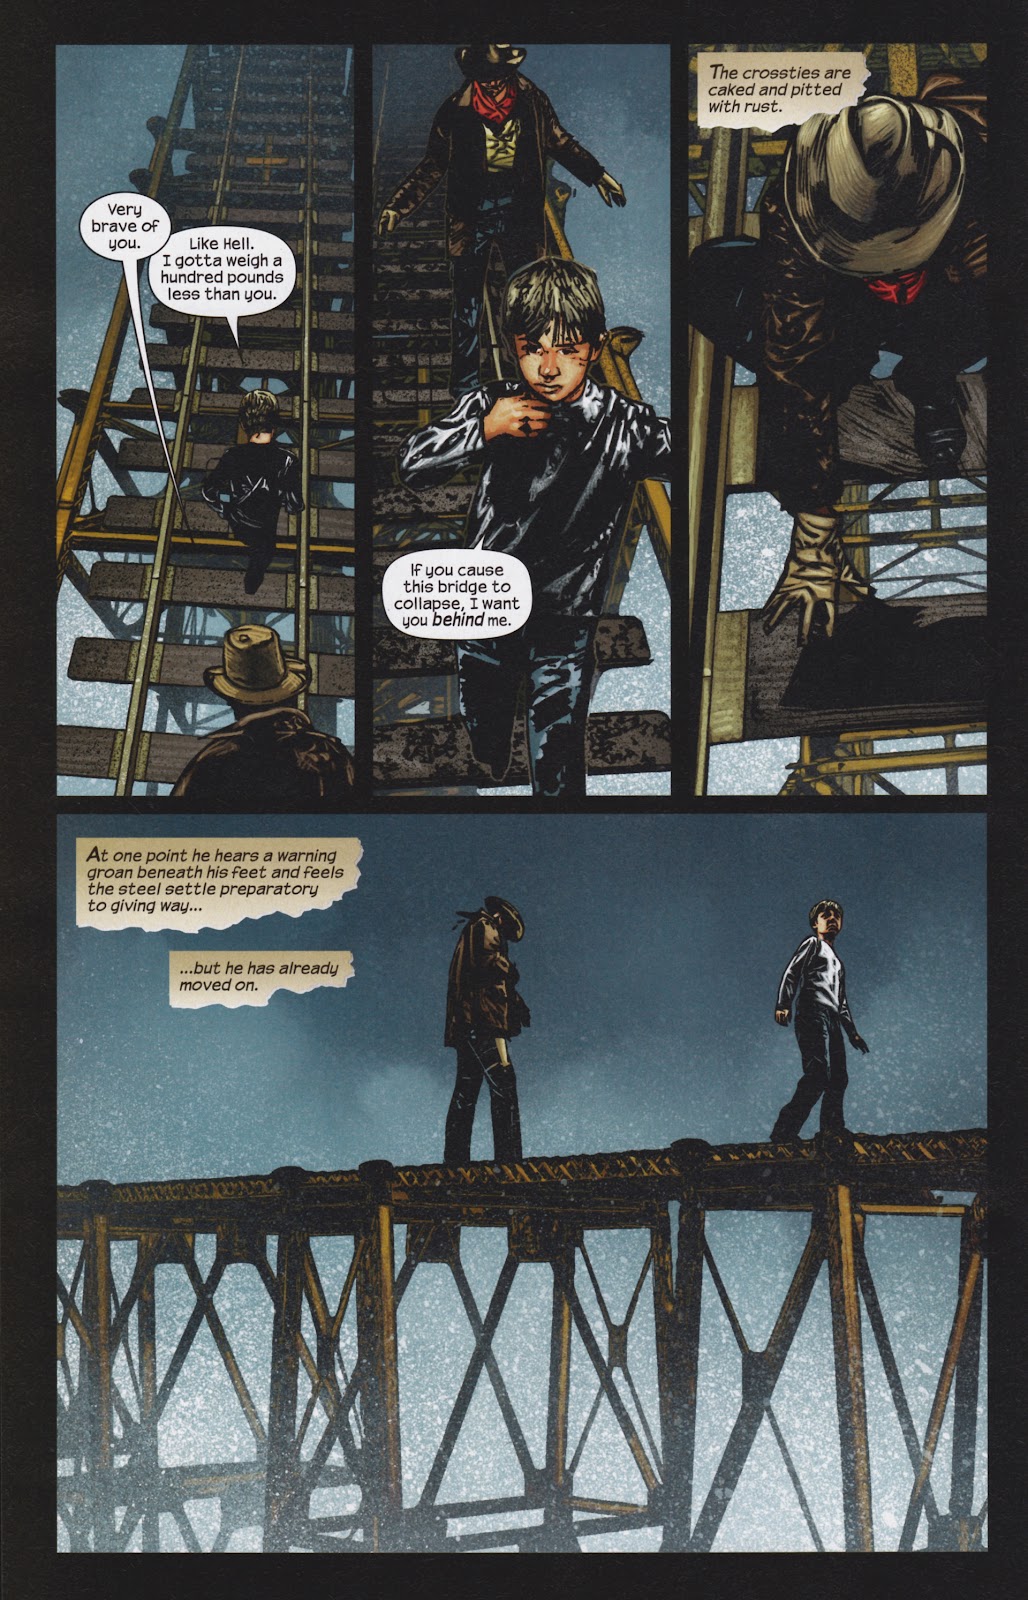 Dark Tower: The Gunslinger - The Man in Black issue 4 - Page 11